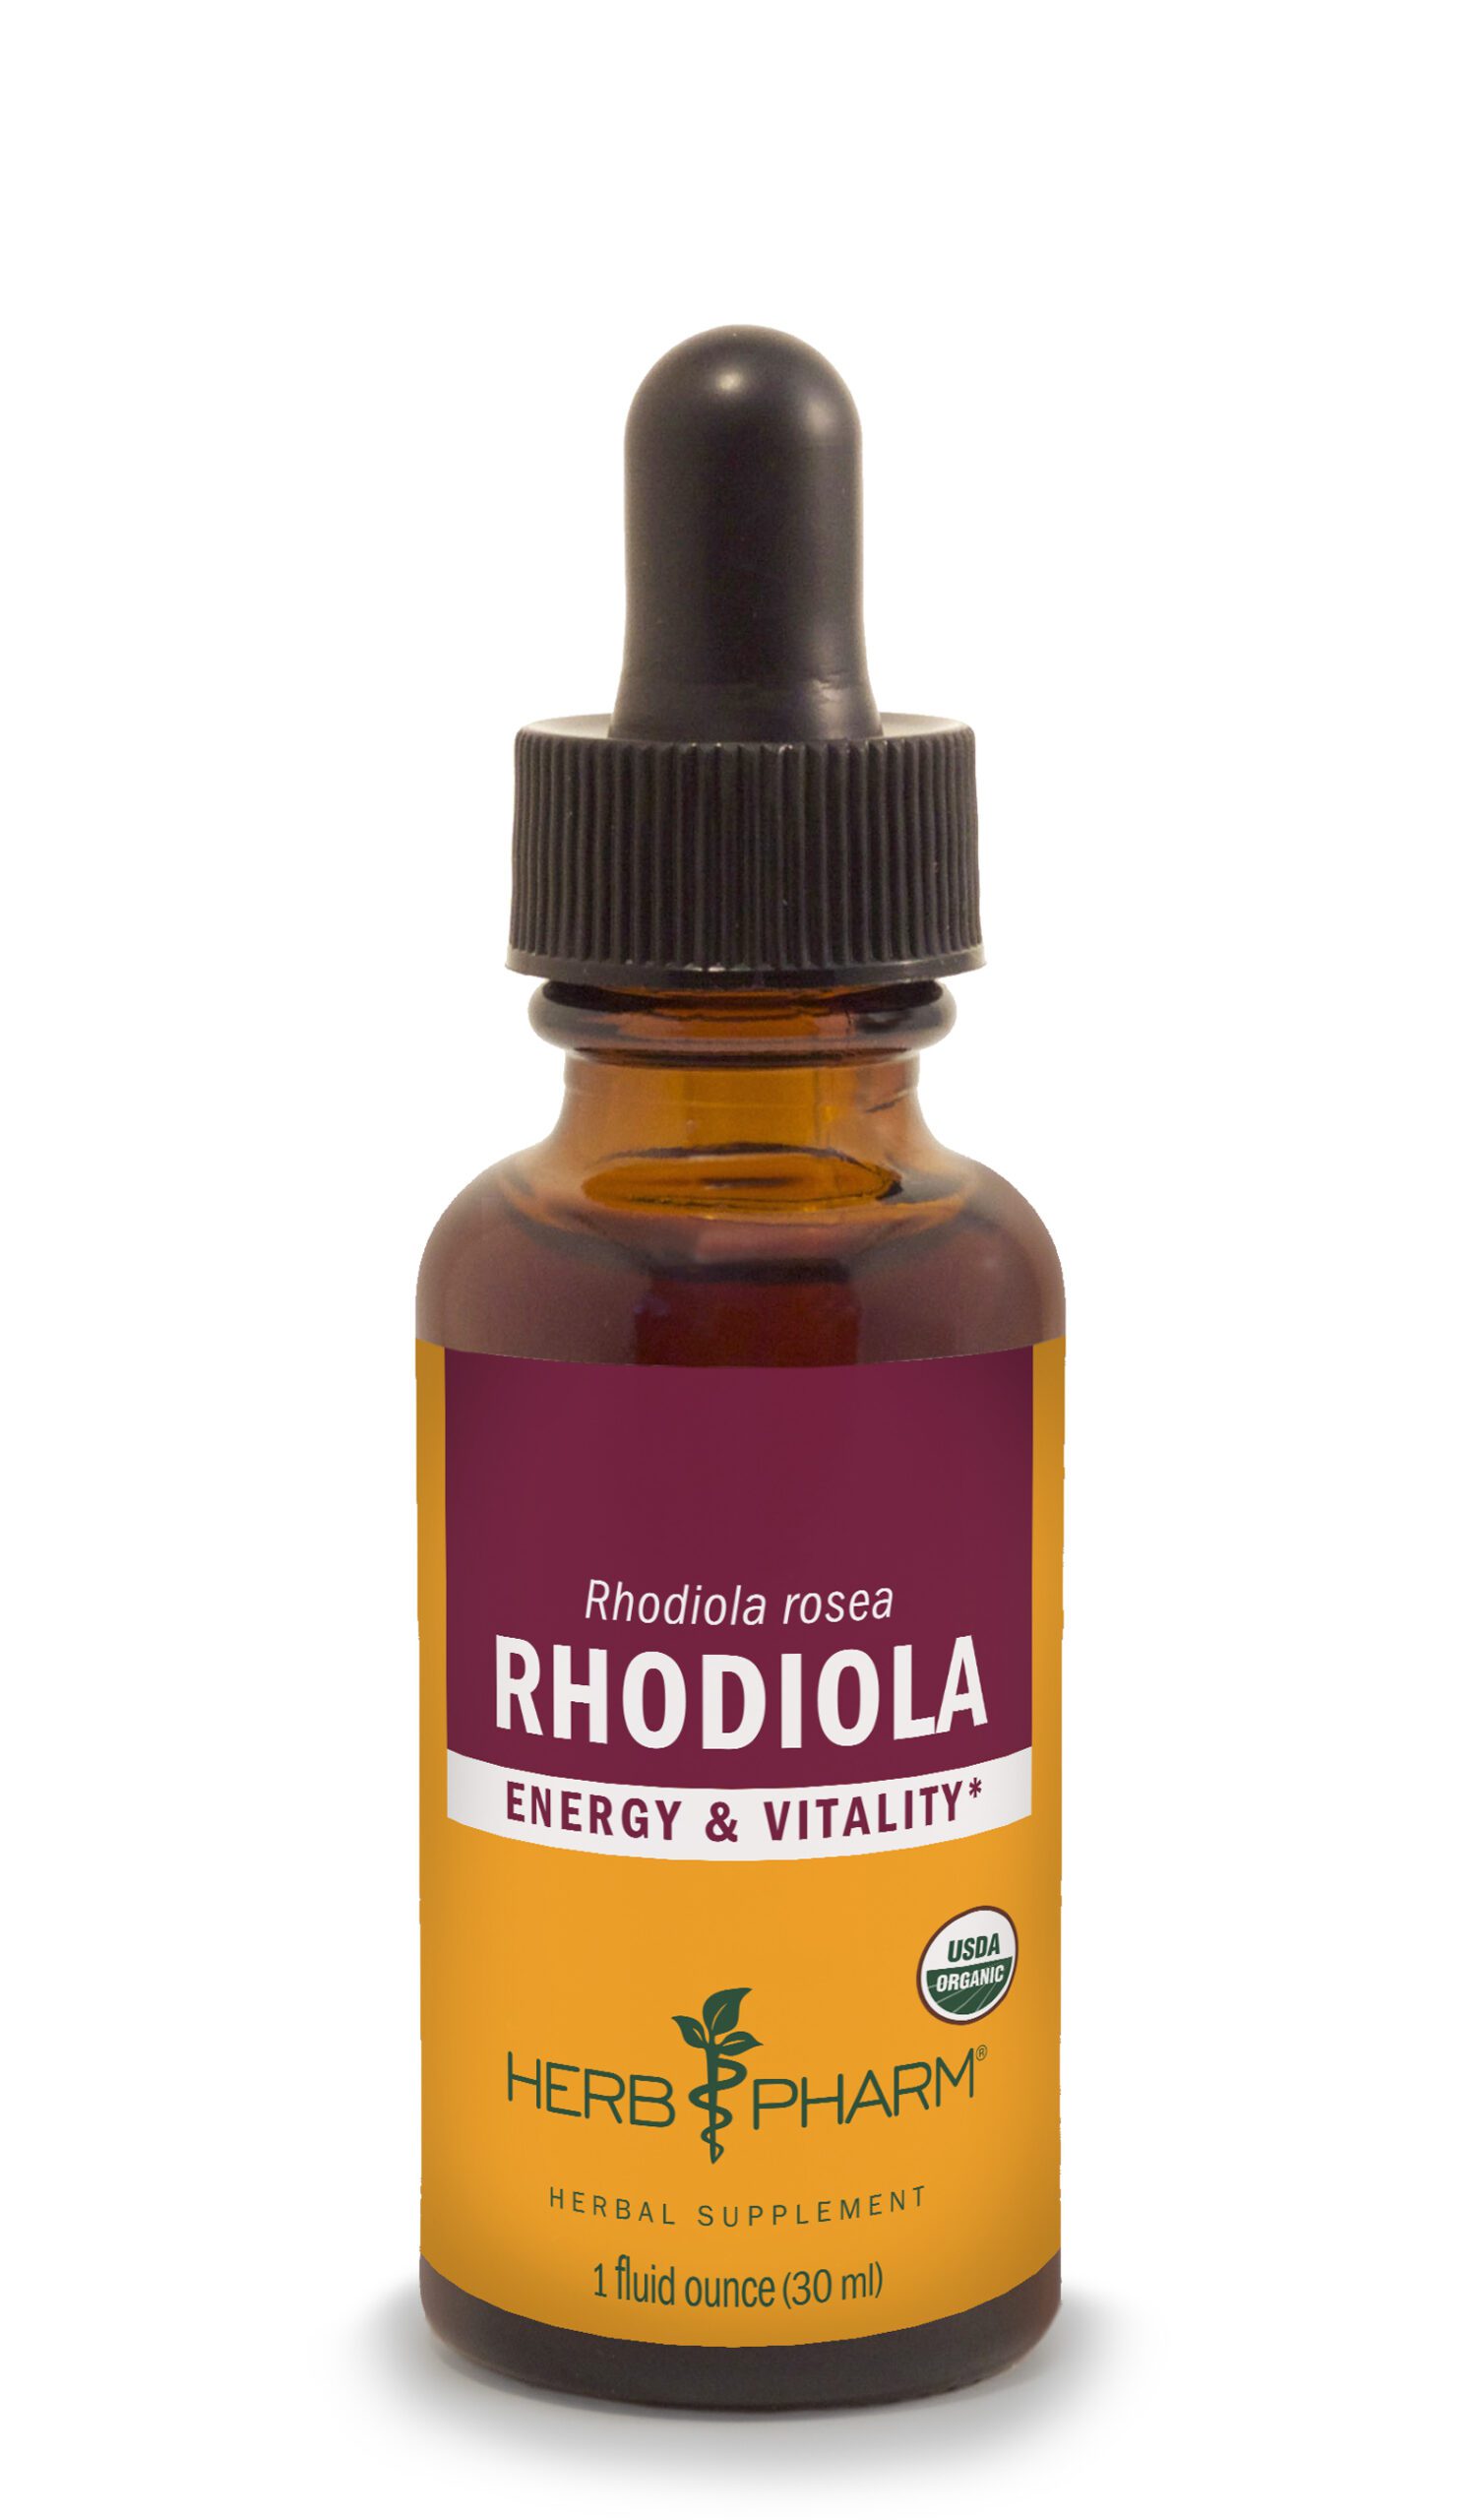 Product Listing Image for Herb Pharm Rhodiola Tincture 1oz